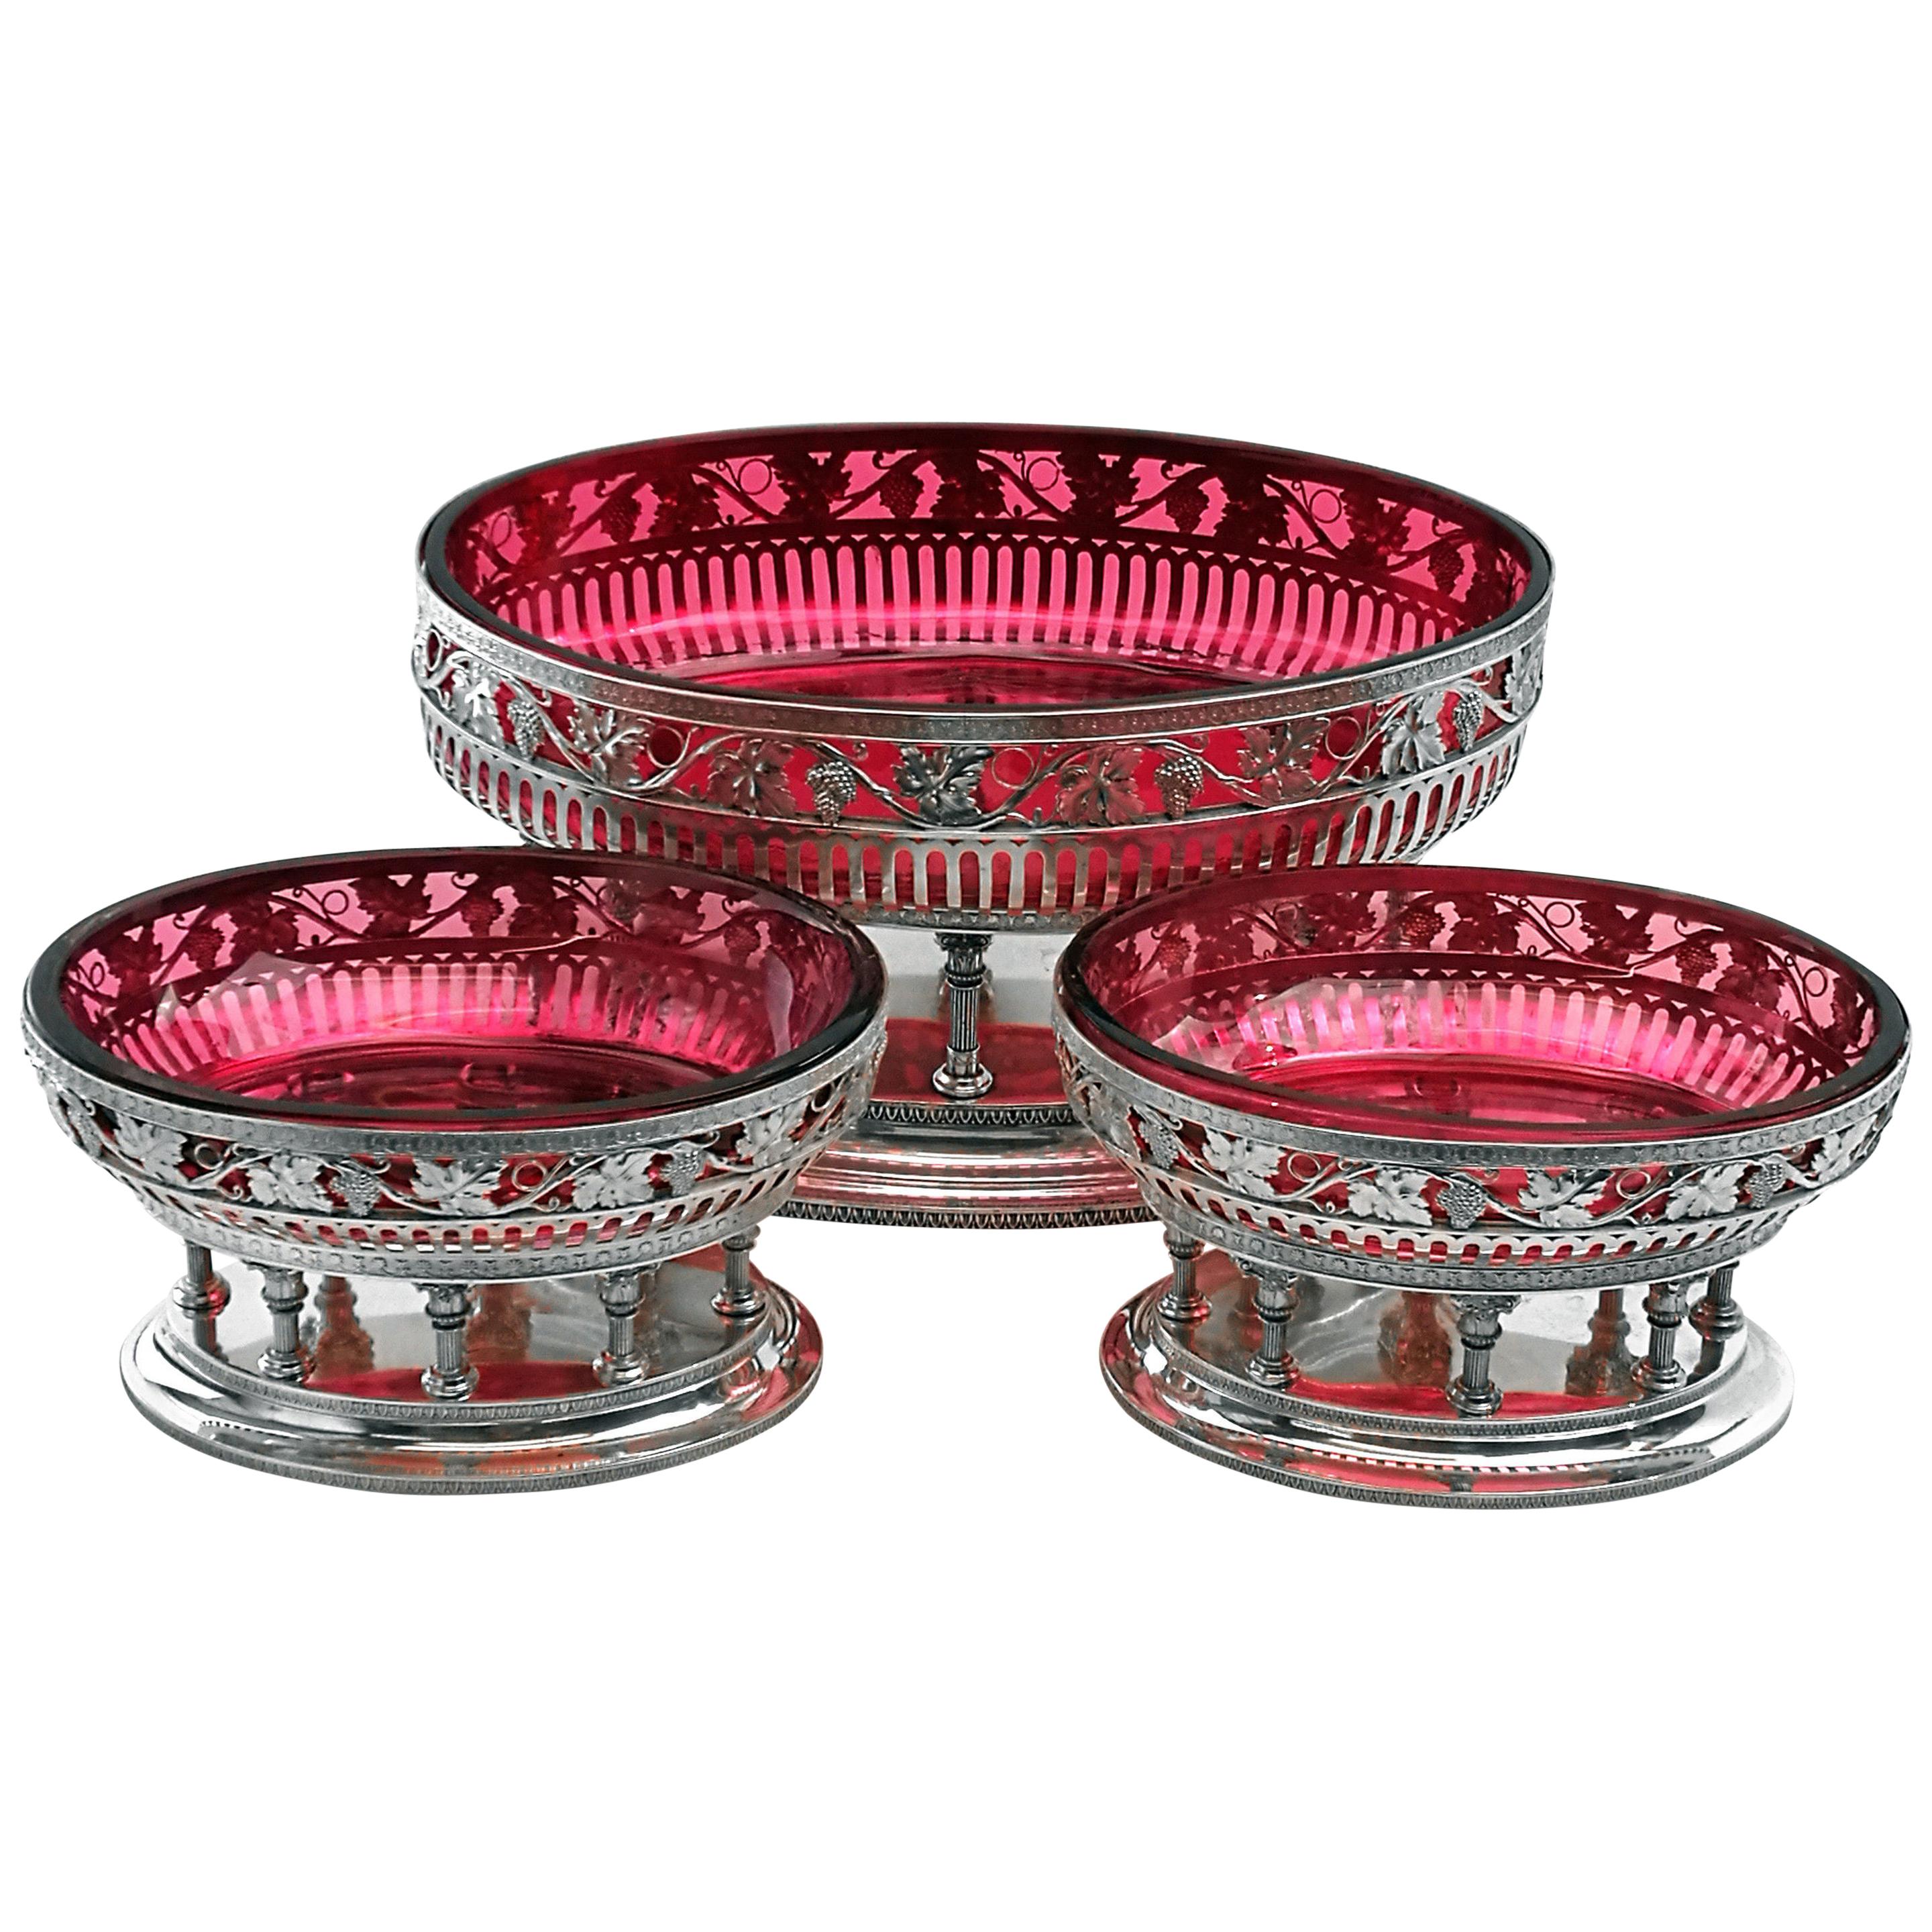 Set of 3 German Solid Silver Comports / Dishes / Centrepiece, circa 1900